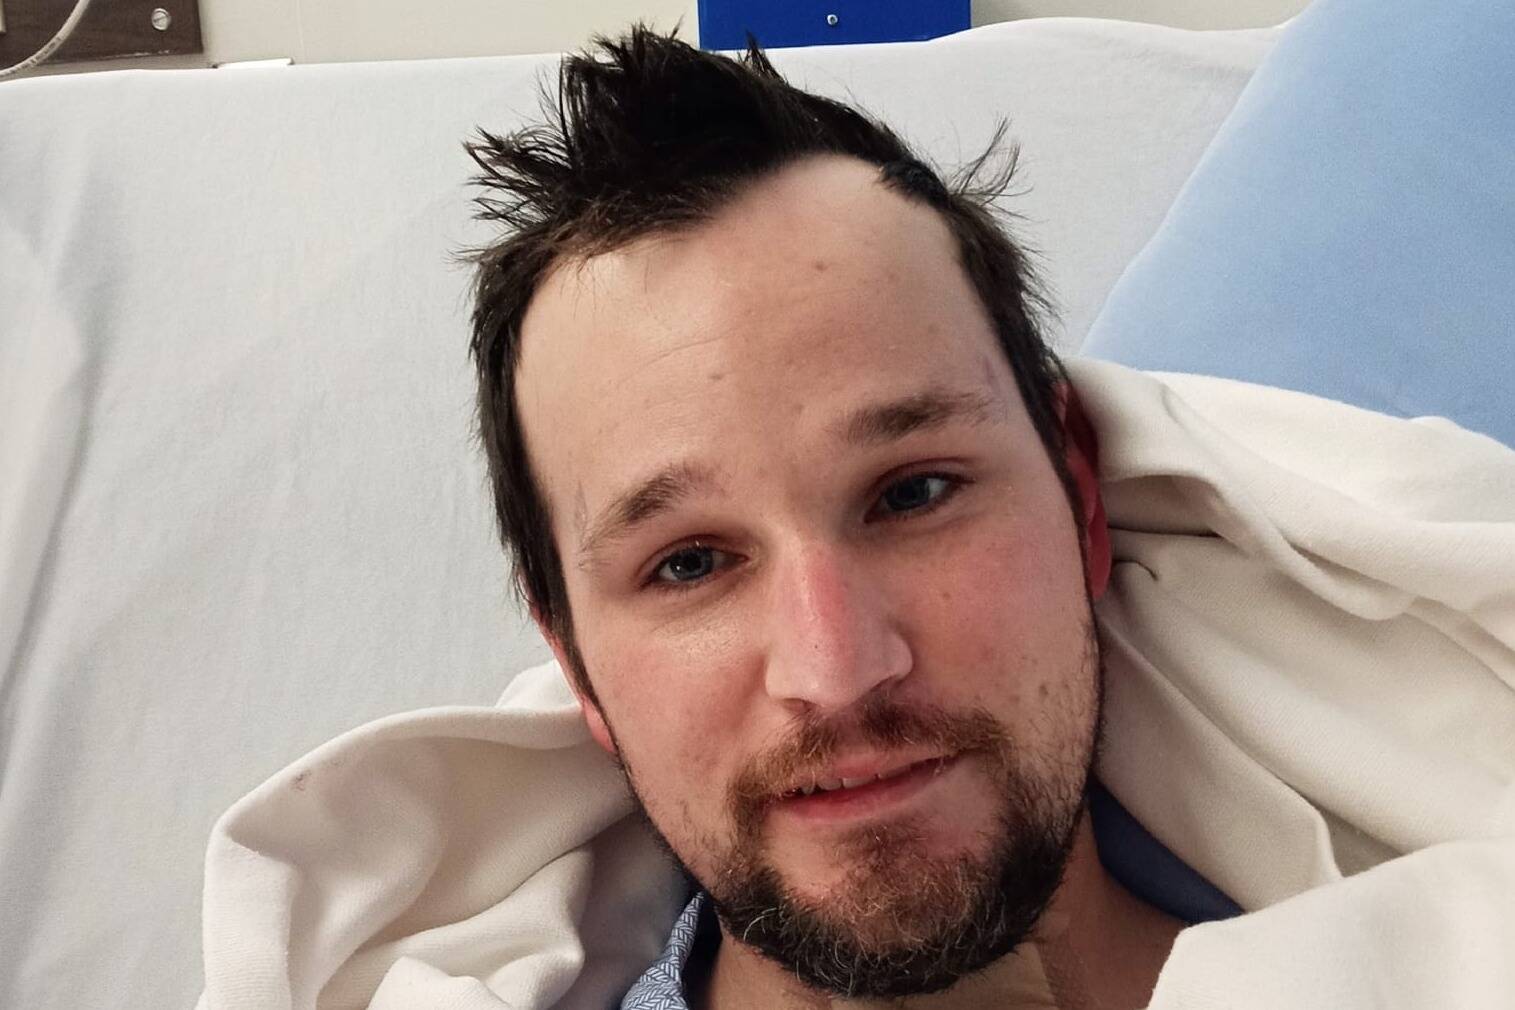 Davin Cochrane is awake, alert, and breathing on his own at Victoria General Hospital after being shot twice in the head by RCMP on March 28. (Courtesy of Sarah Annie Brown)